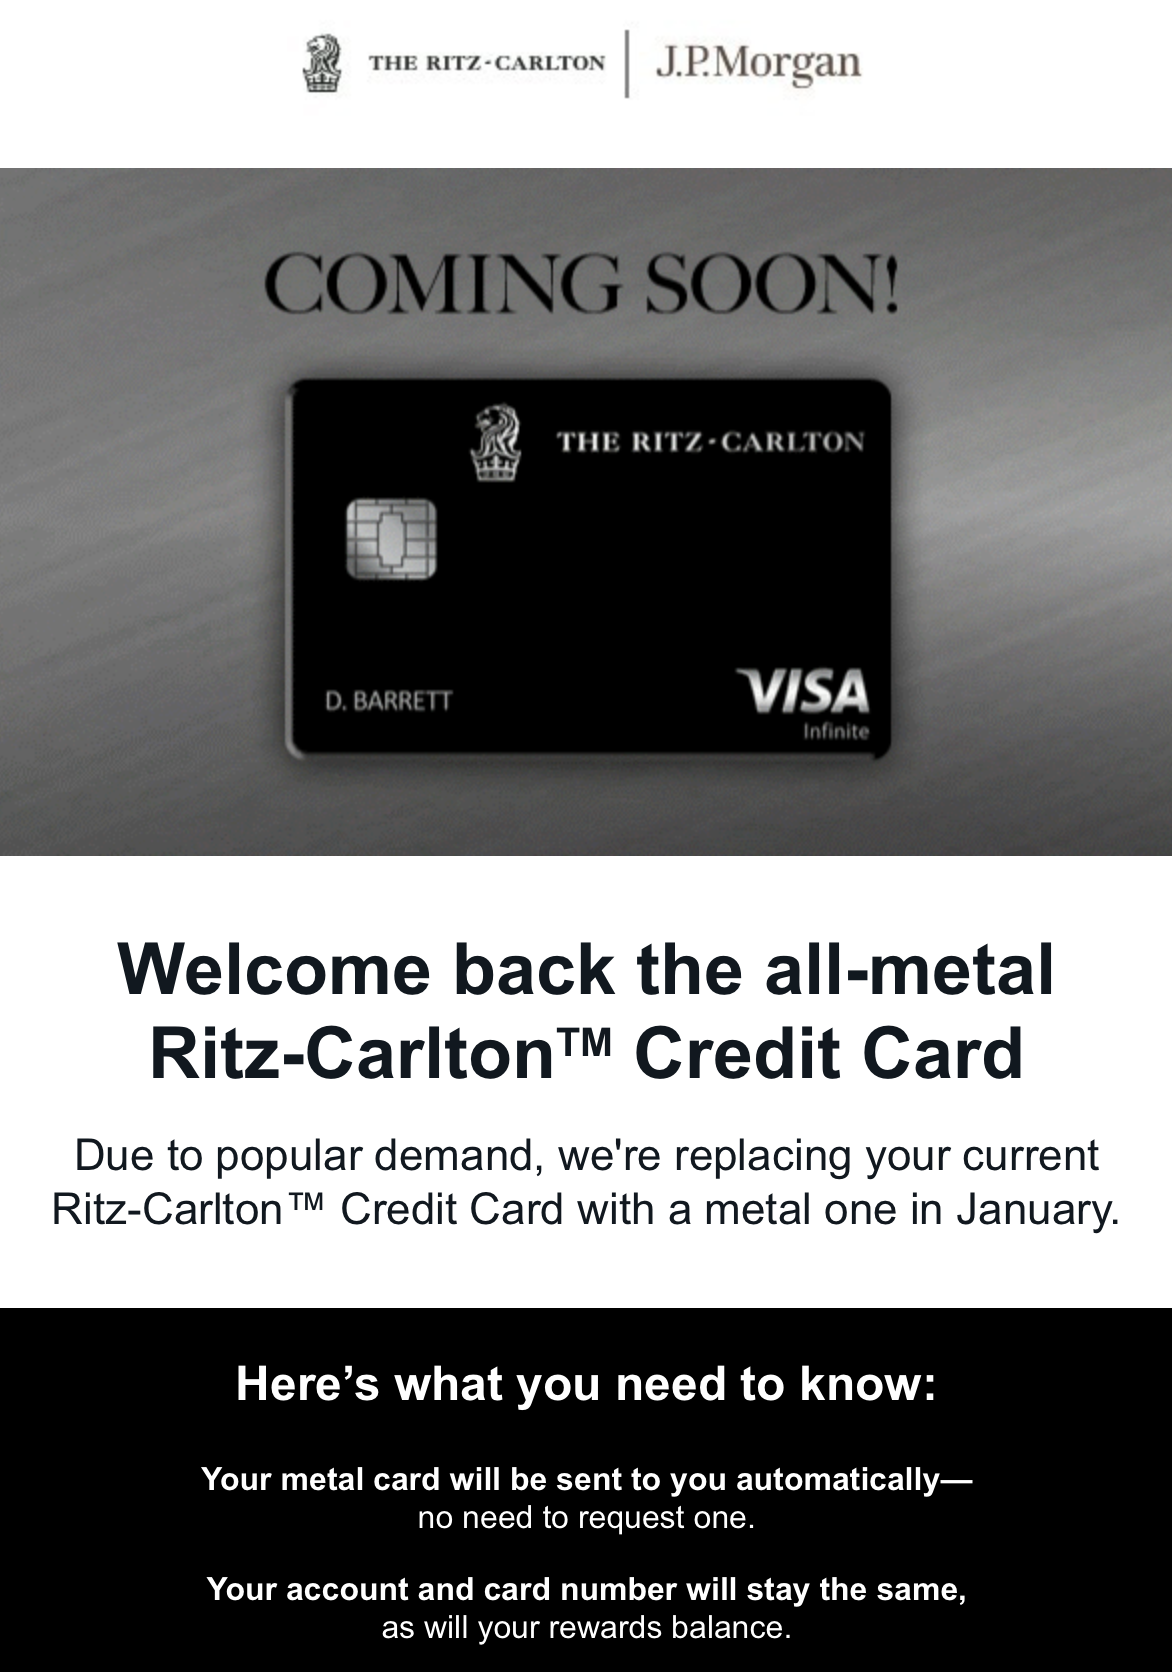 Who Should Get A Black Credit Card? Probably Not You!